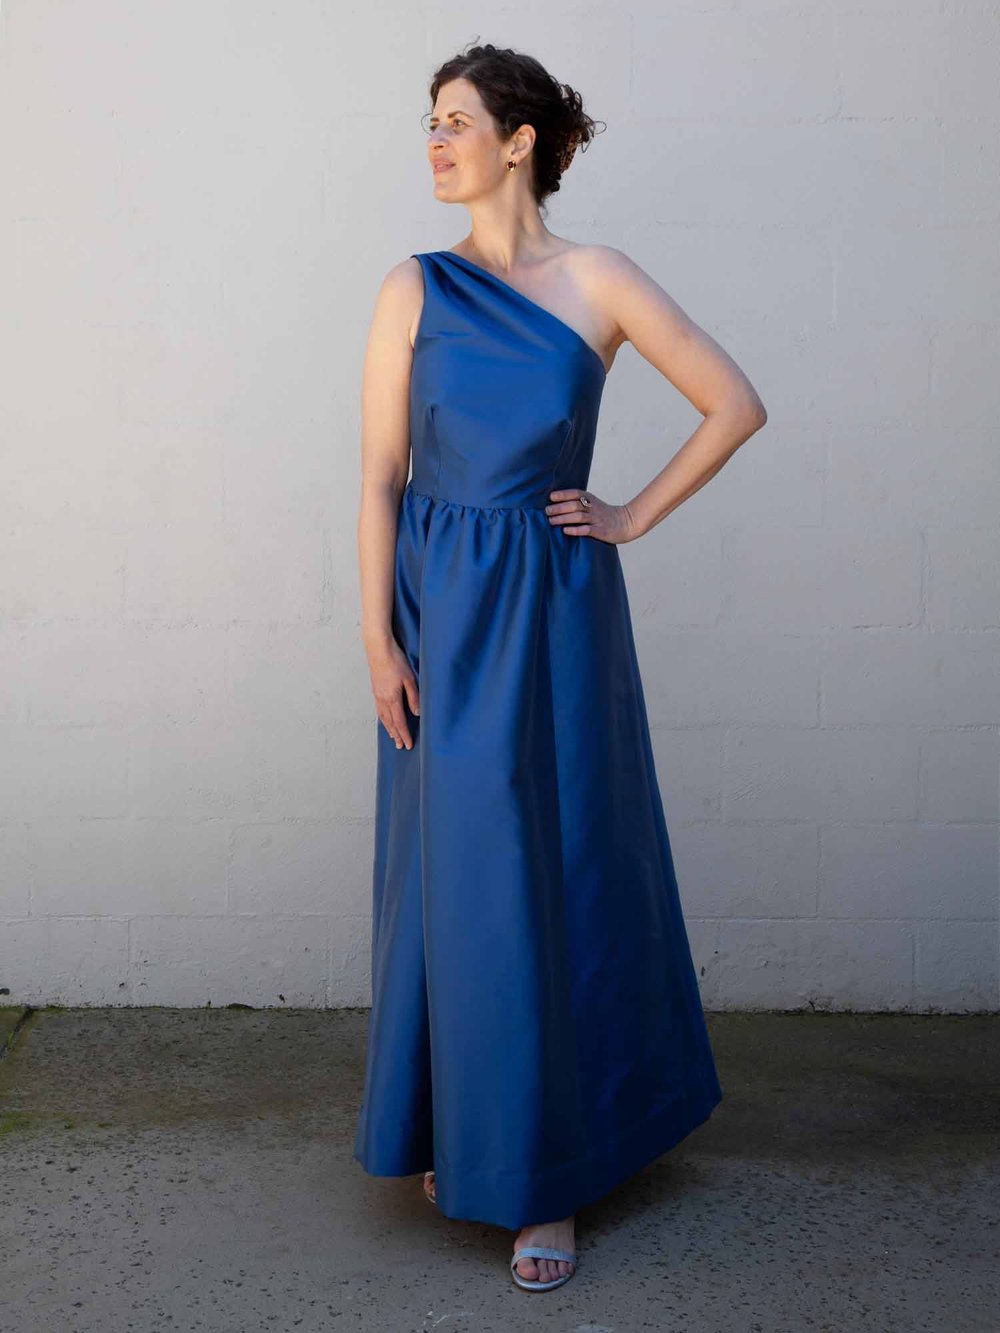 DIY One-Shoulder Evening Gown–Self-drafted by Sew DIY Patterns